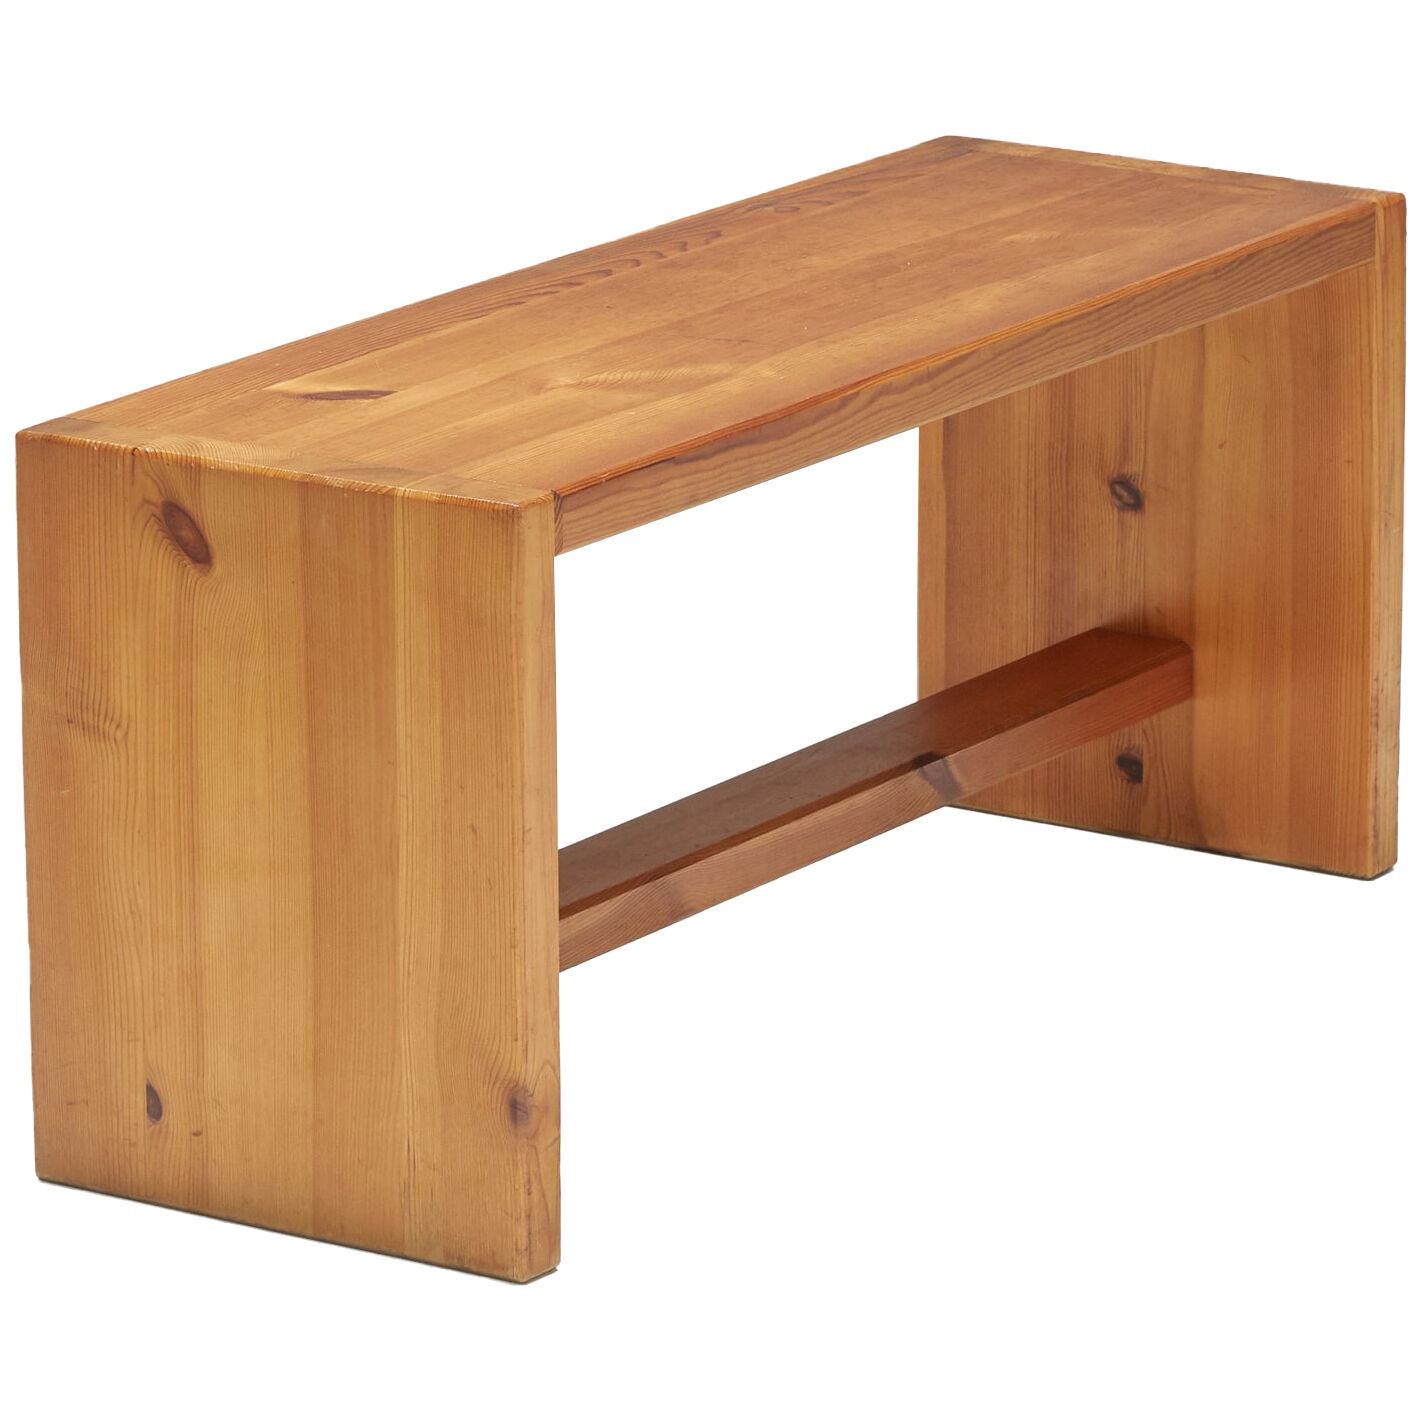 Charlotte Perriand Inspired Pine Wood Bench - 1960's